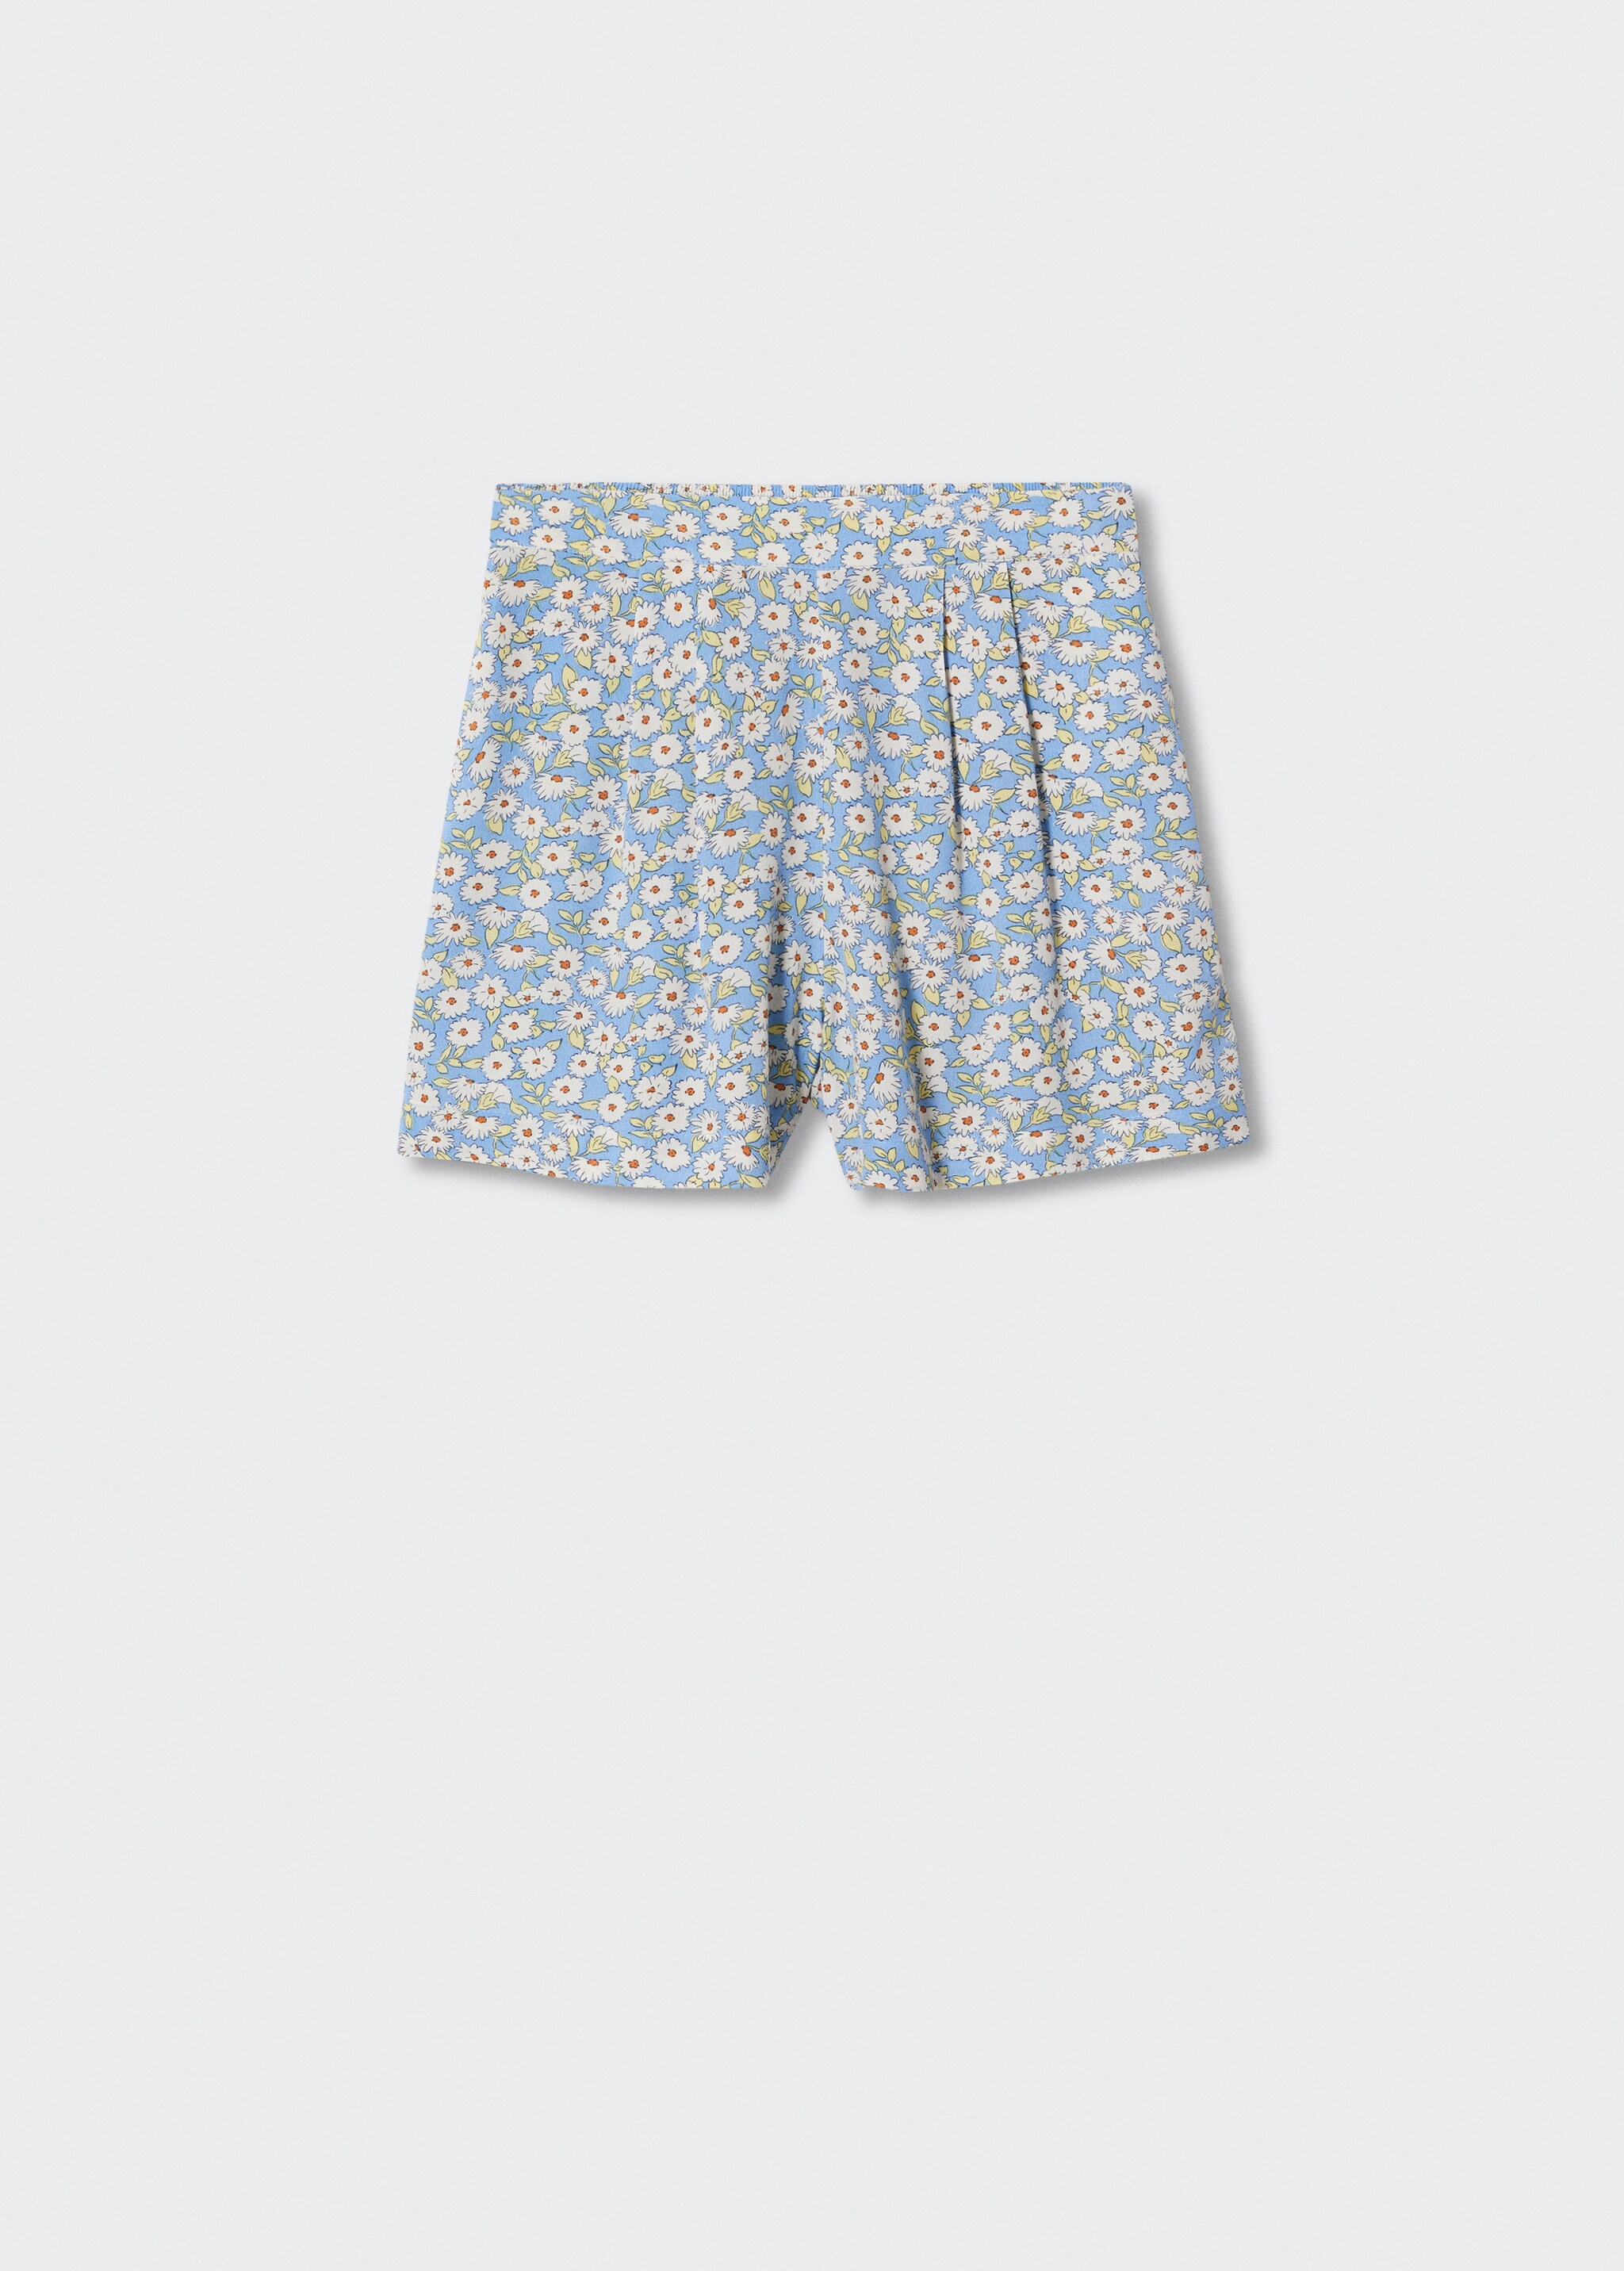 Printed shorts - Article without model